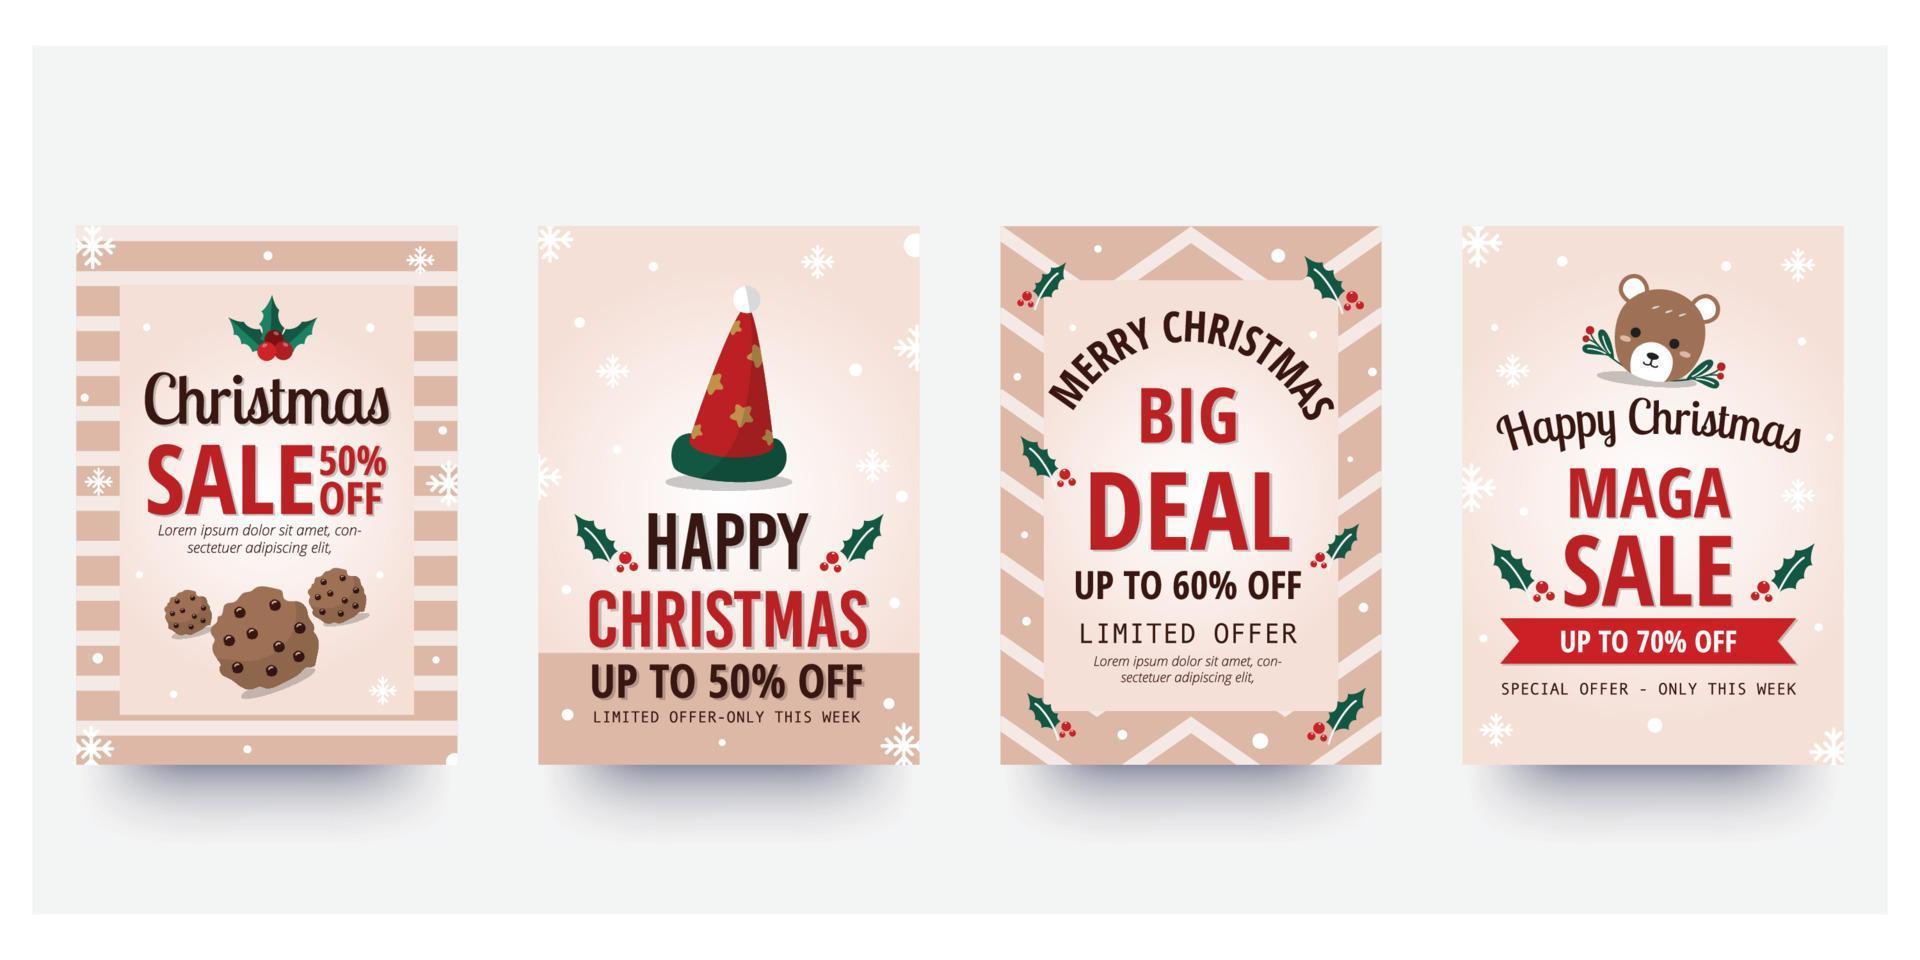 Christmas sle flyer and poster design with sale promotional text and colorful christmas element. Vector illustration.